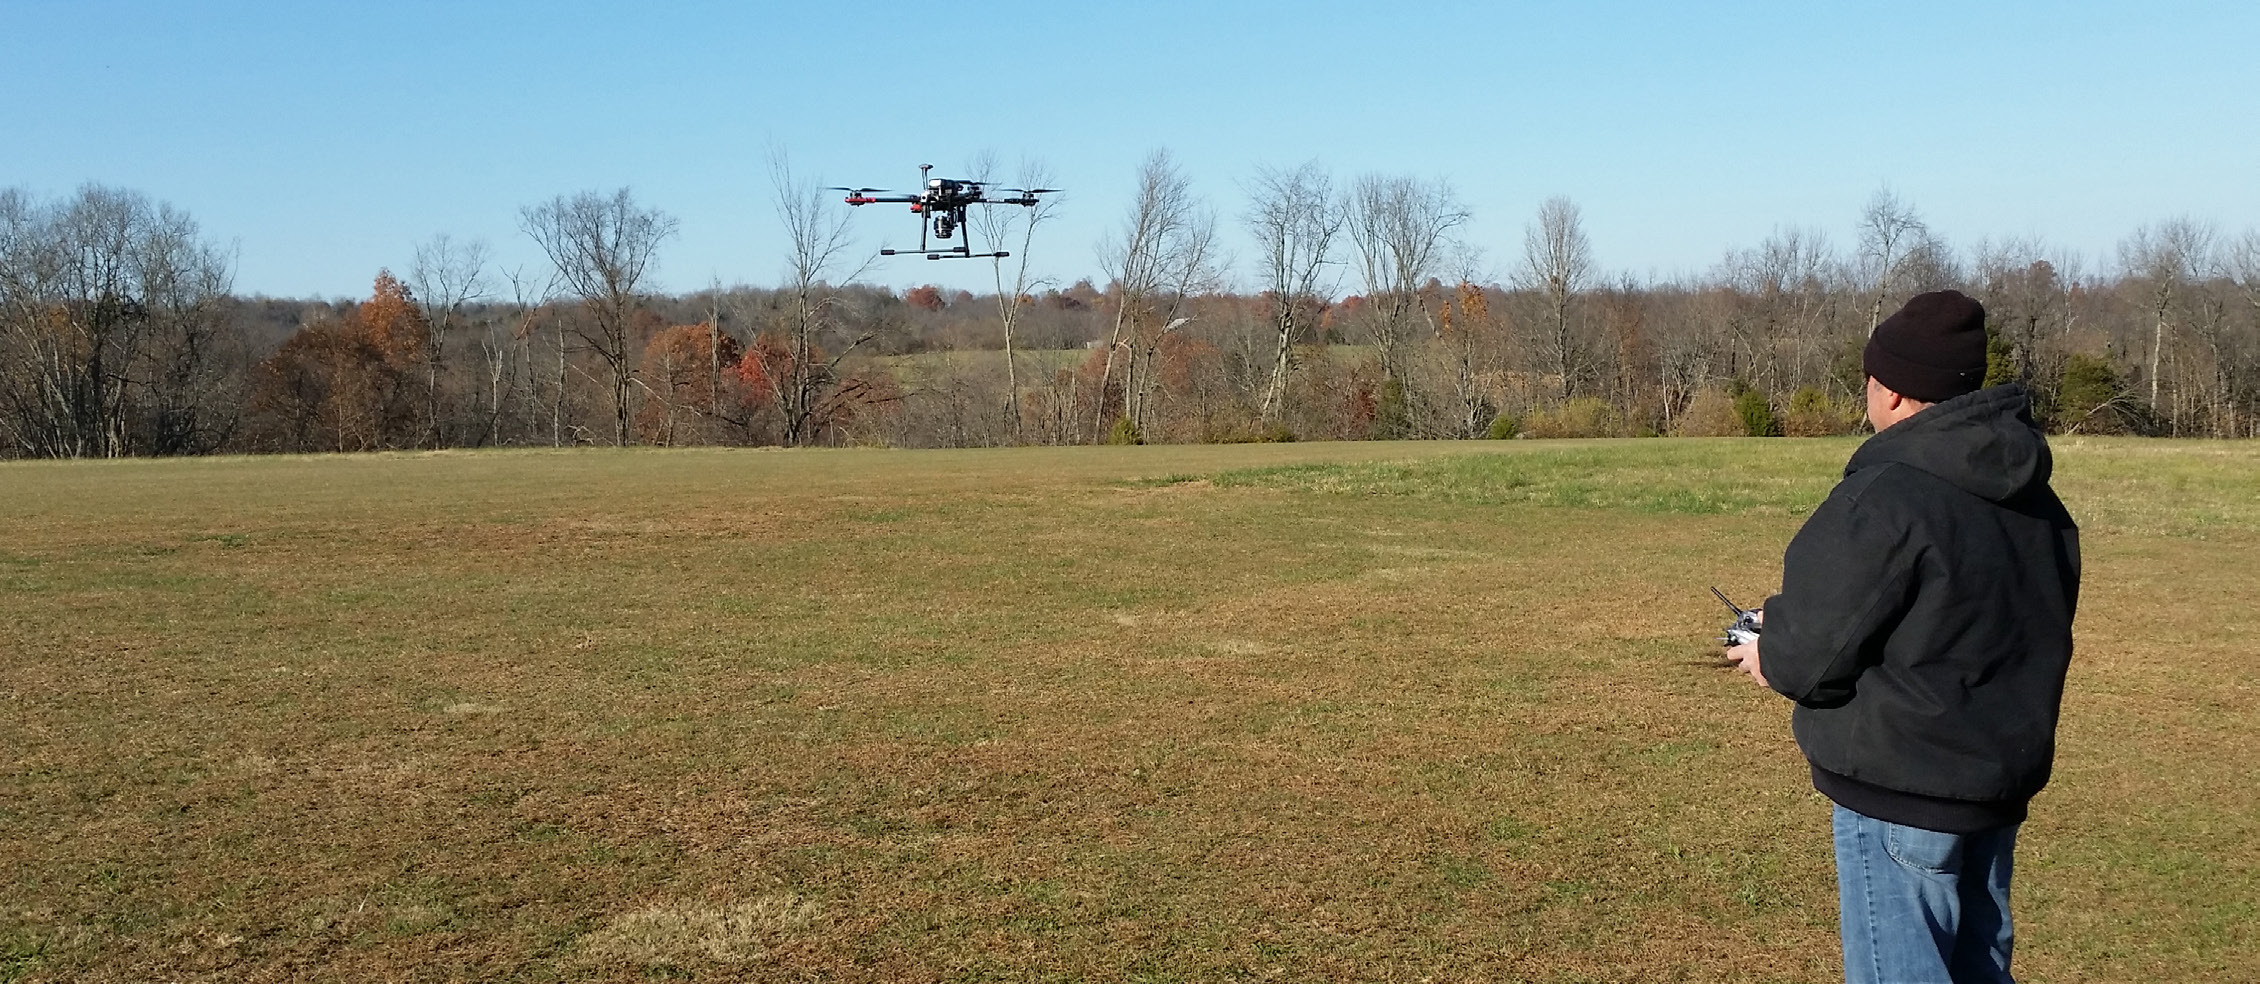 photo of a man flying a drone in a grassy field